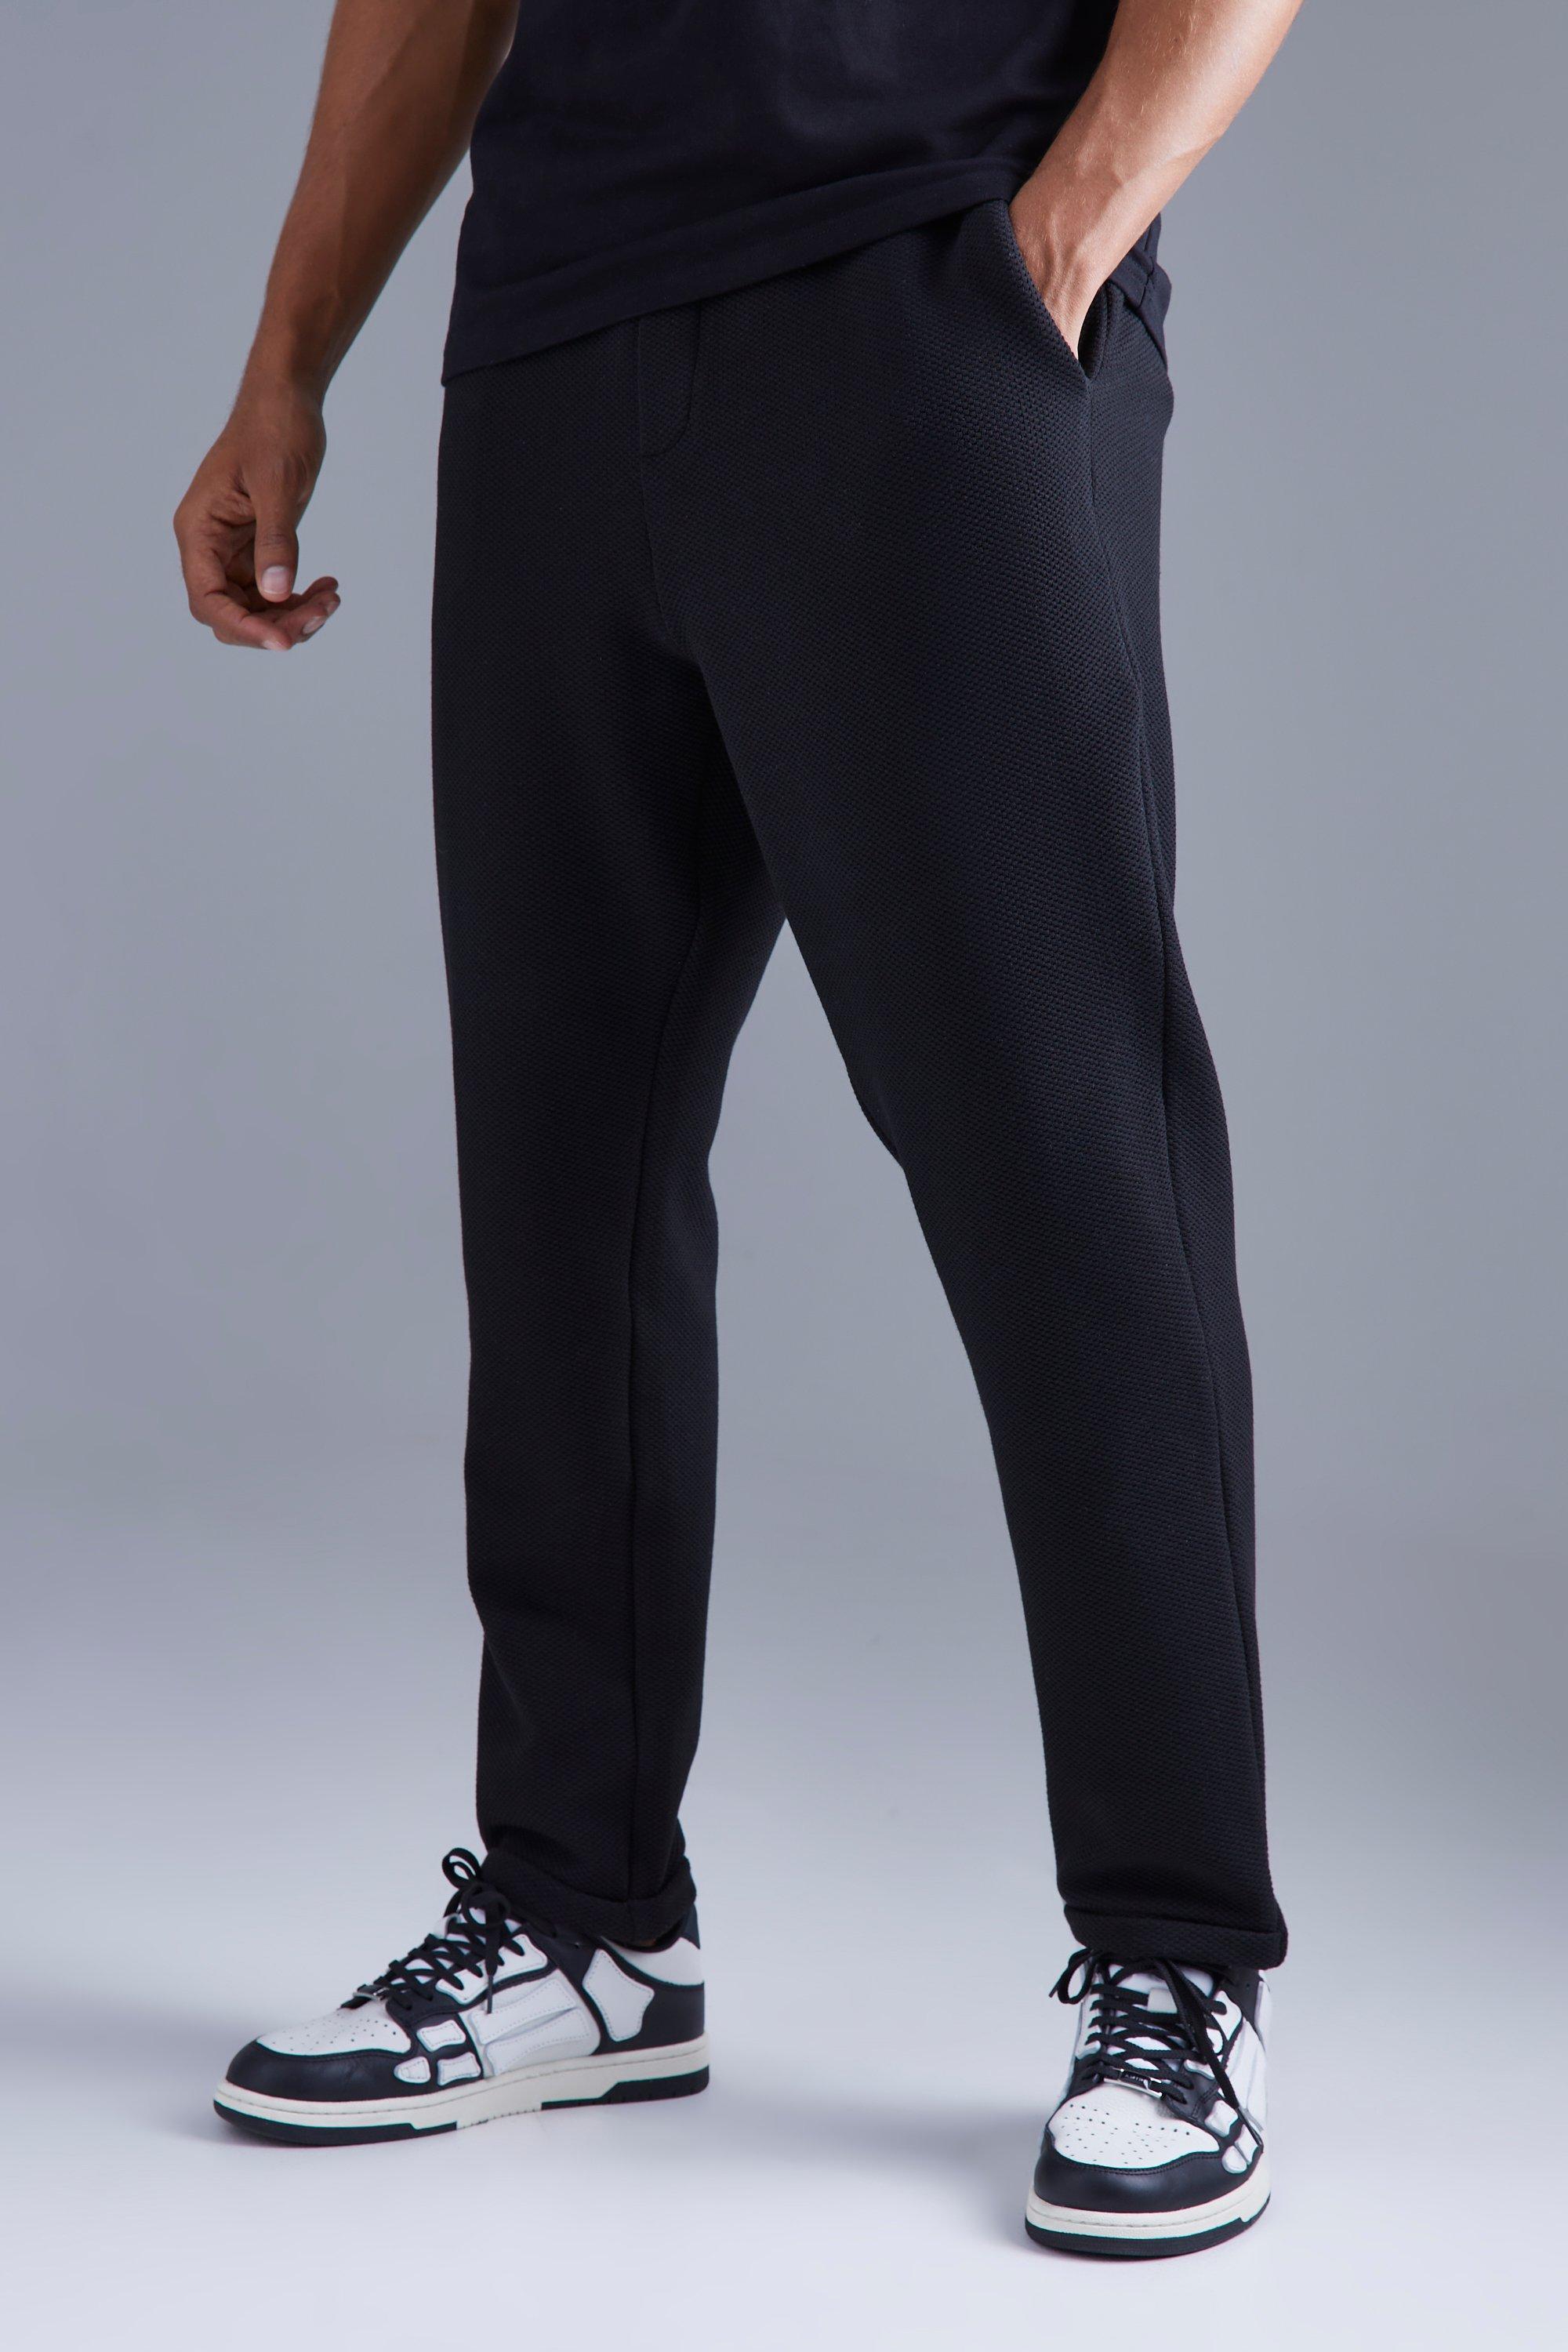 BoohooMAN Elasticated Tapered Textured Smart Trousers in Black for Men ...